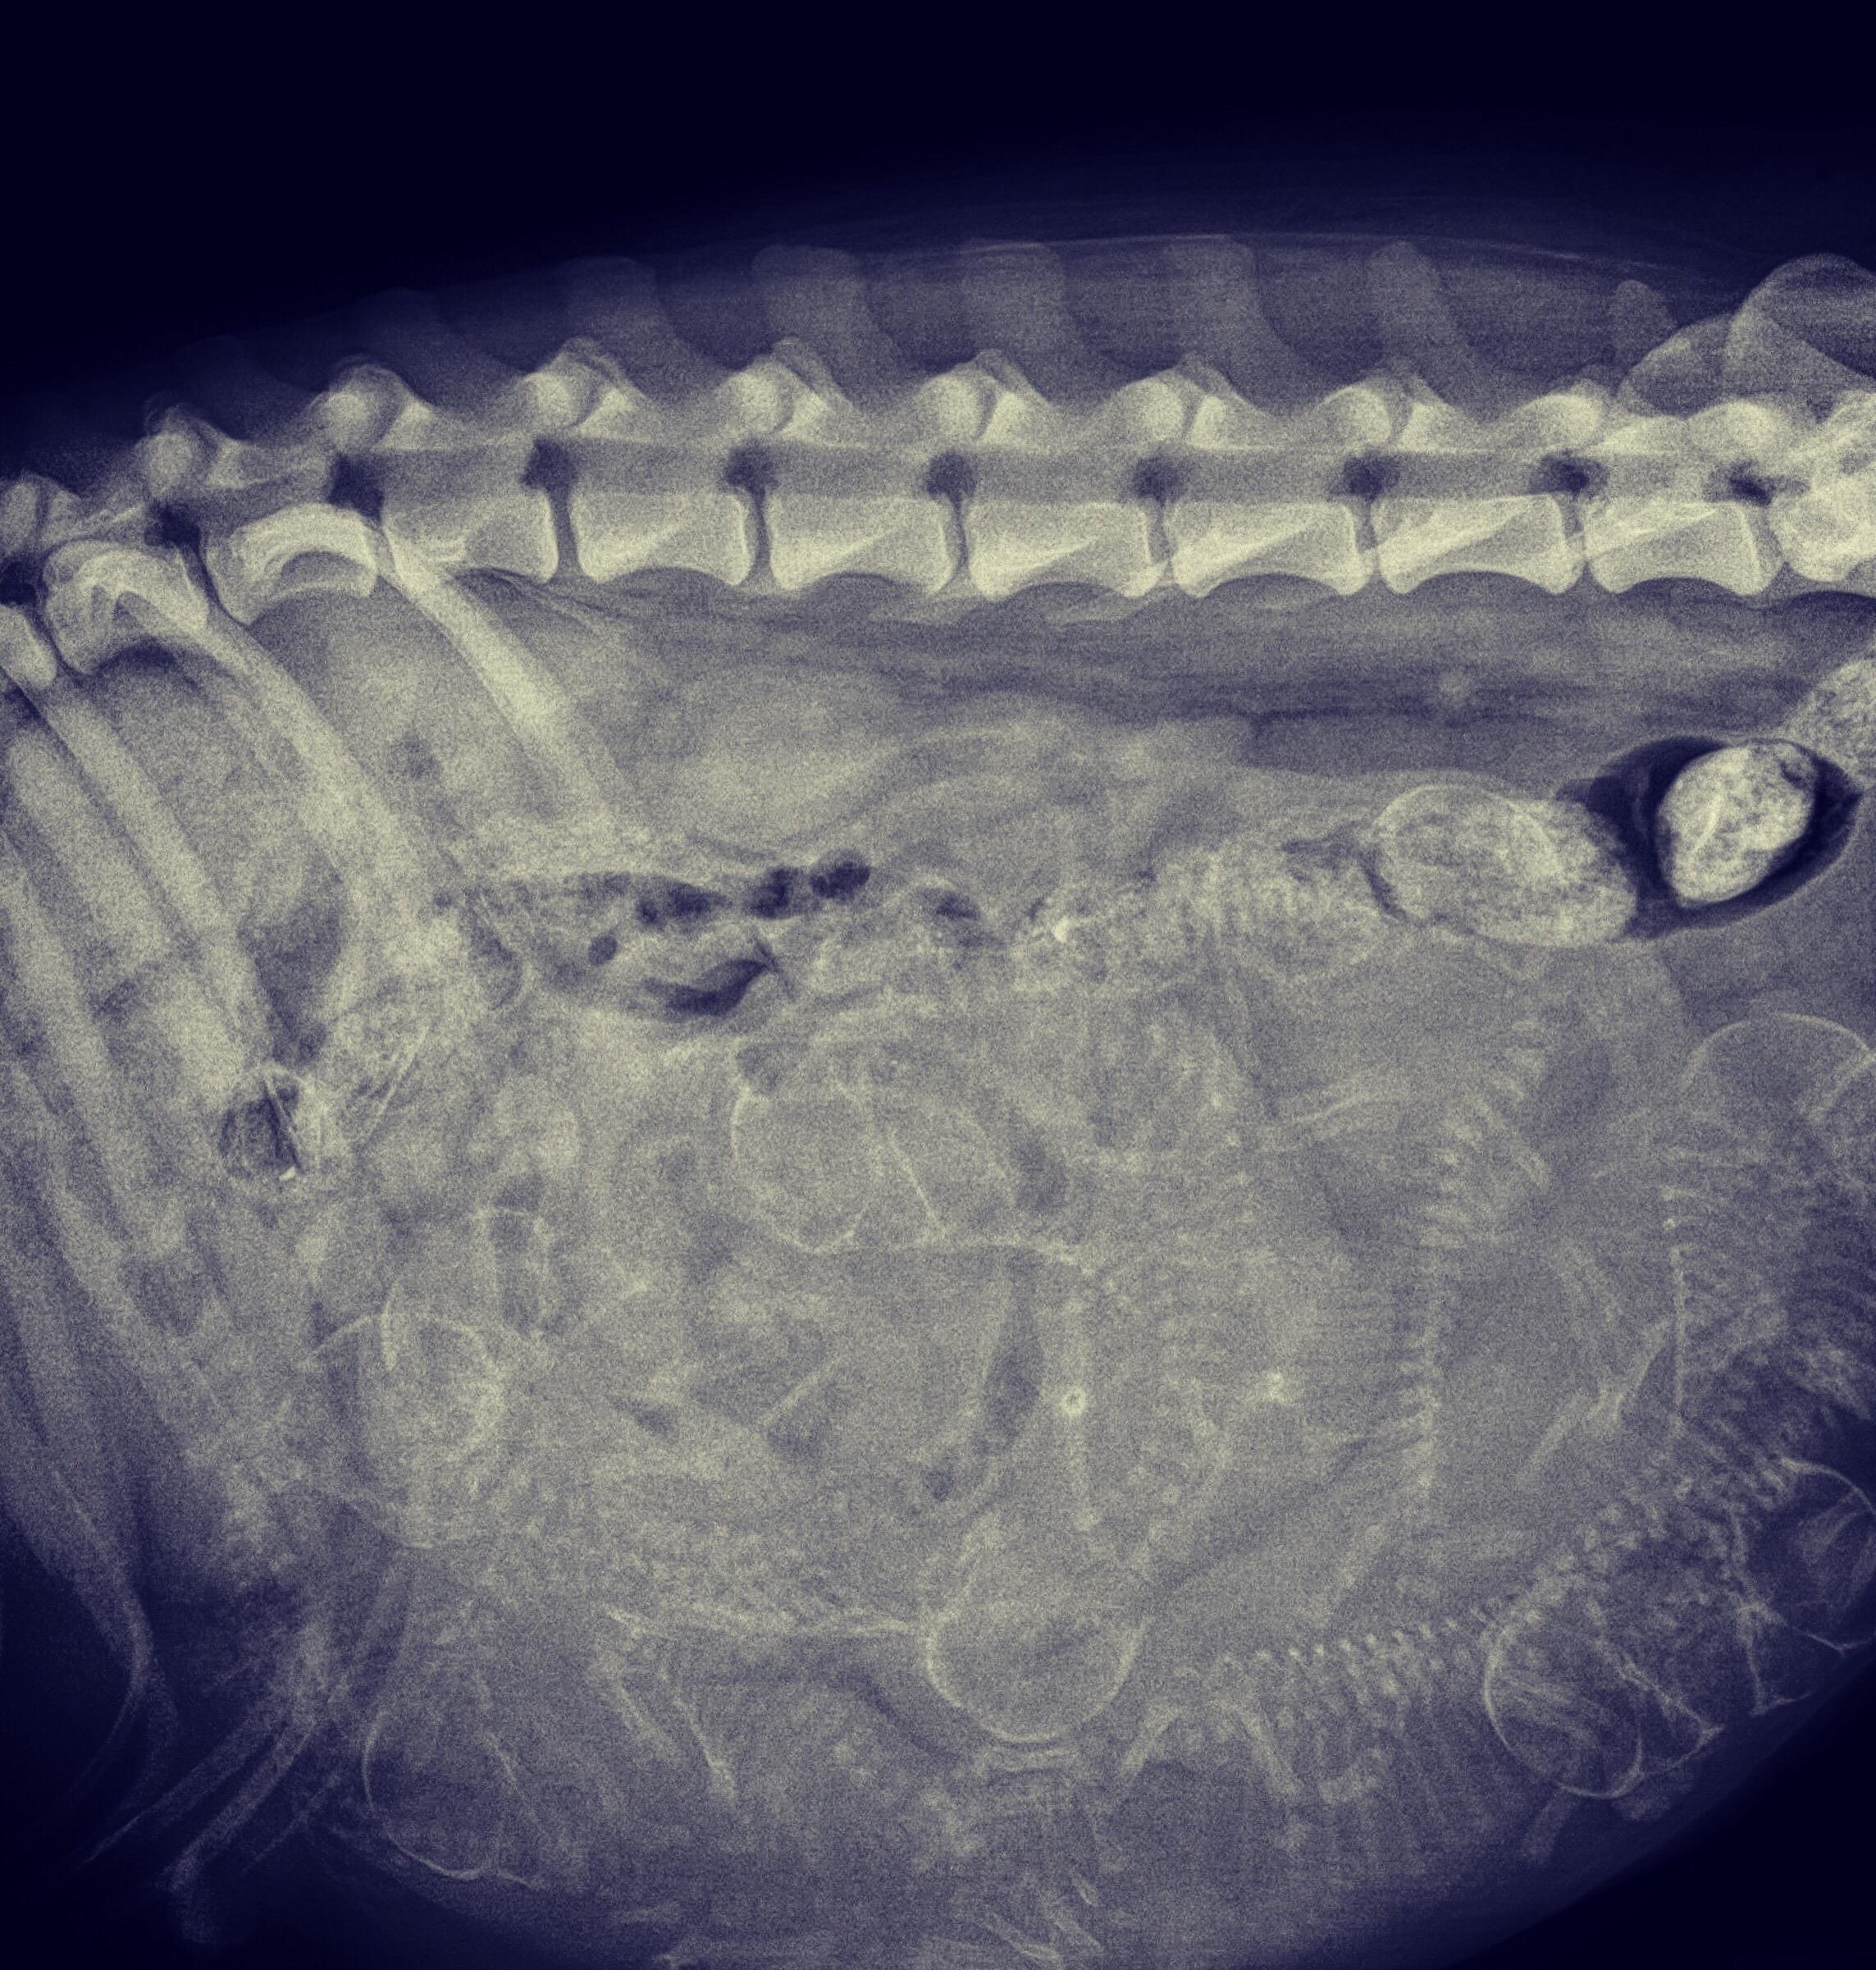 A mass of dog skeletons visible in the dog&#x27;s torso